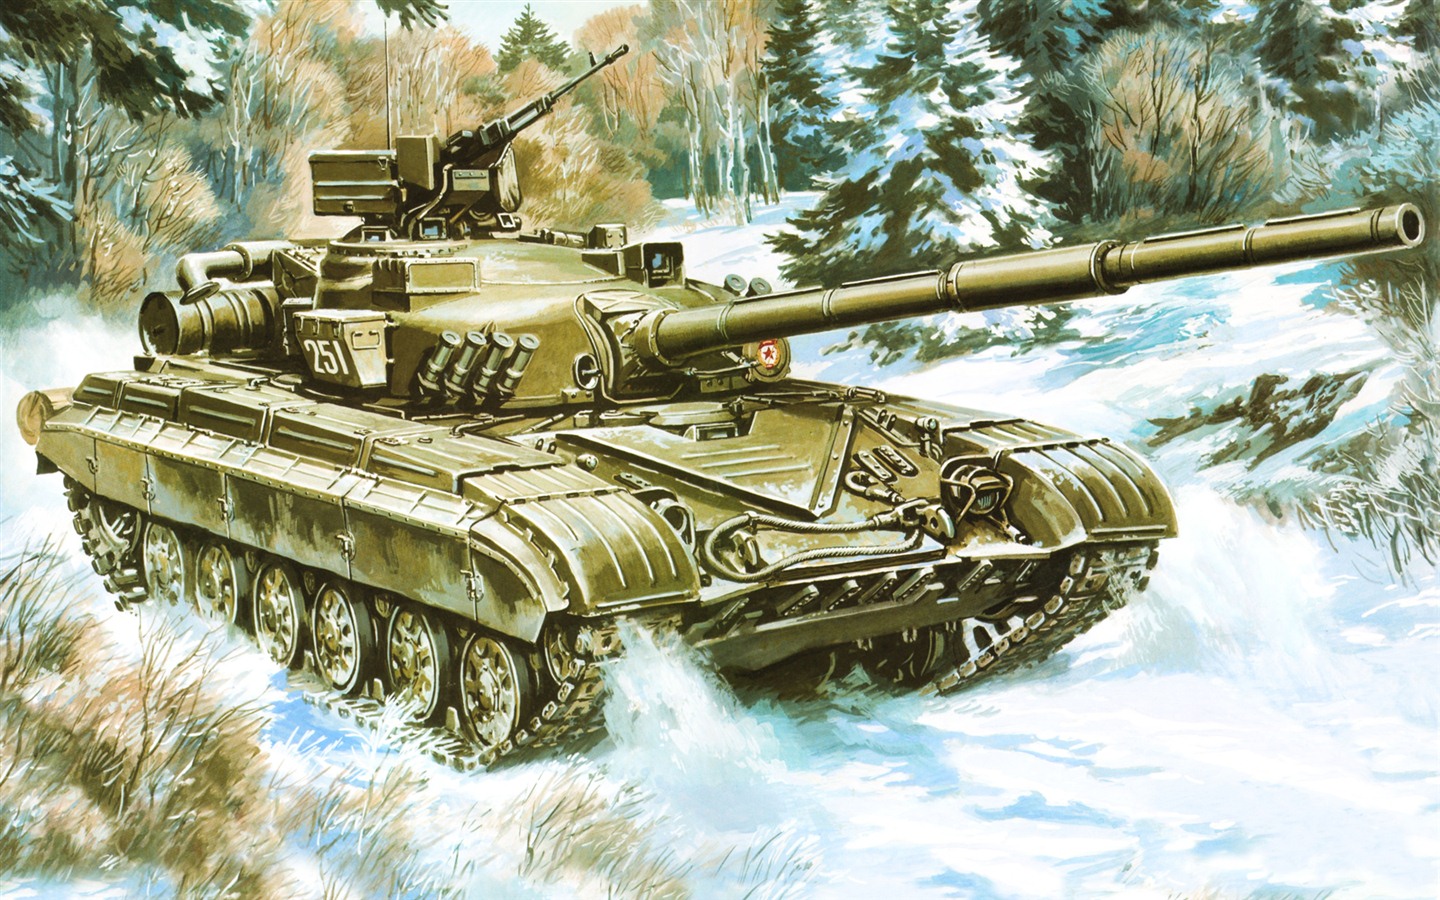 Military tanks, armored HD painting wallpapers #1 - 1440x900